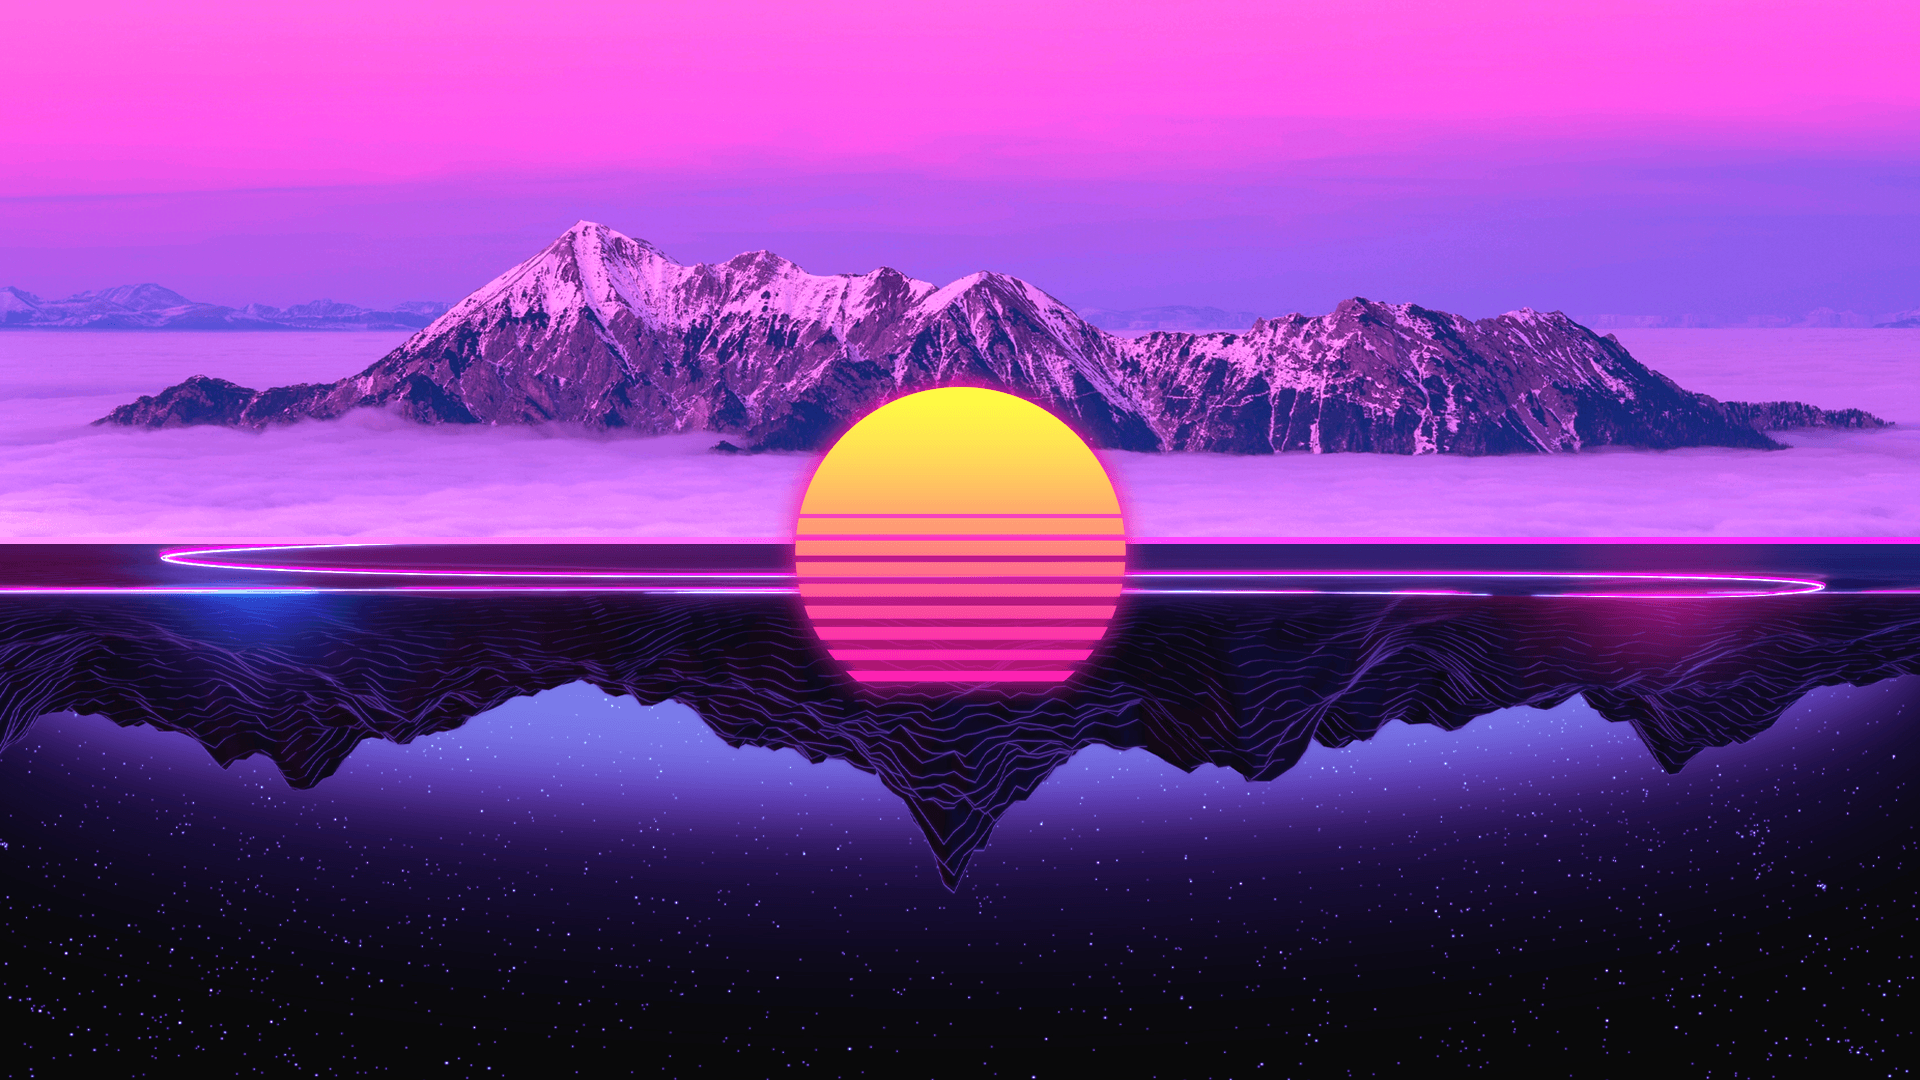 Sunset over a mountain range with a purple and pink sky - 1920x1080, sunrise